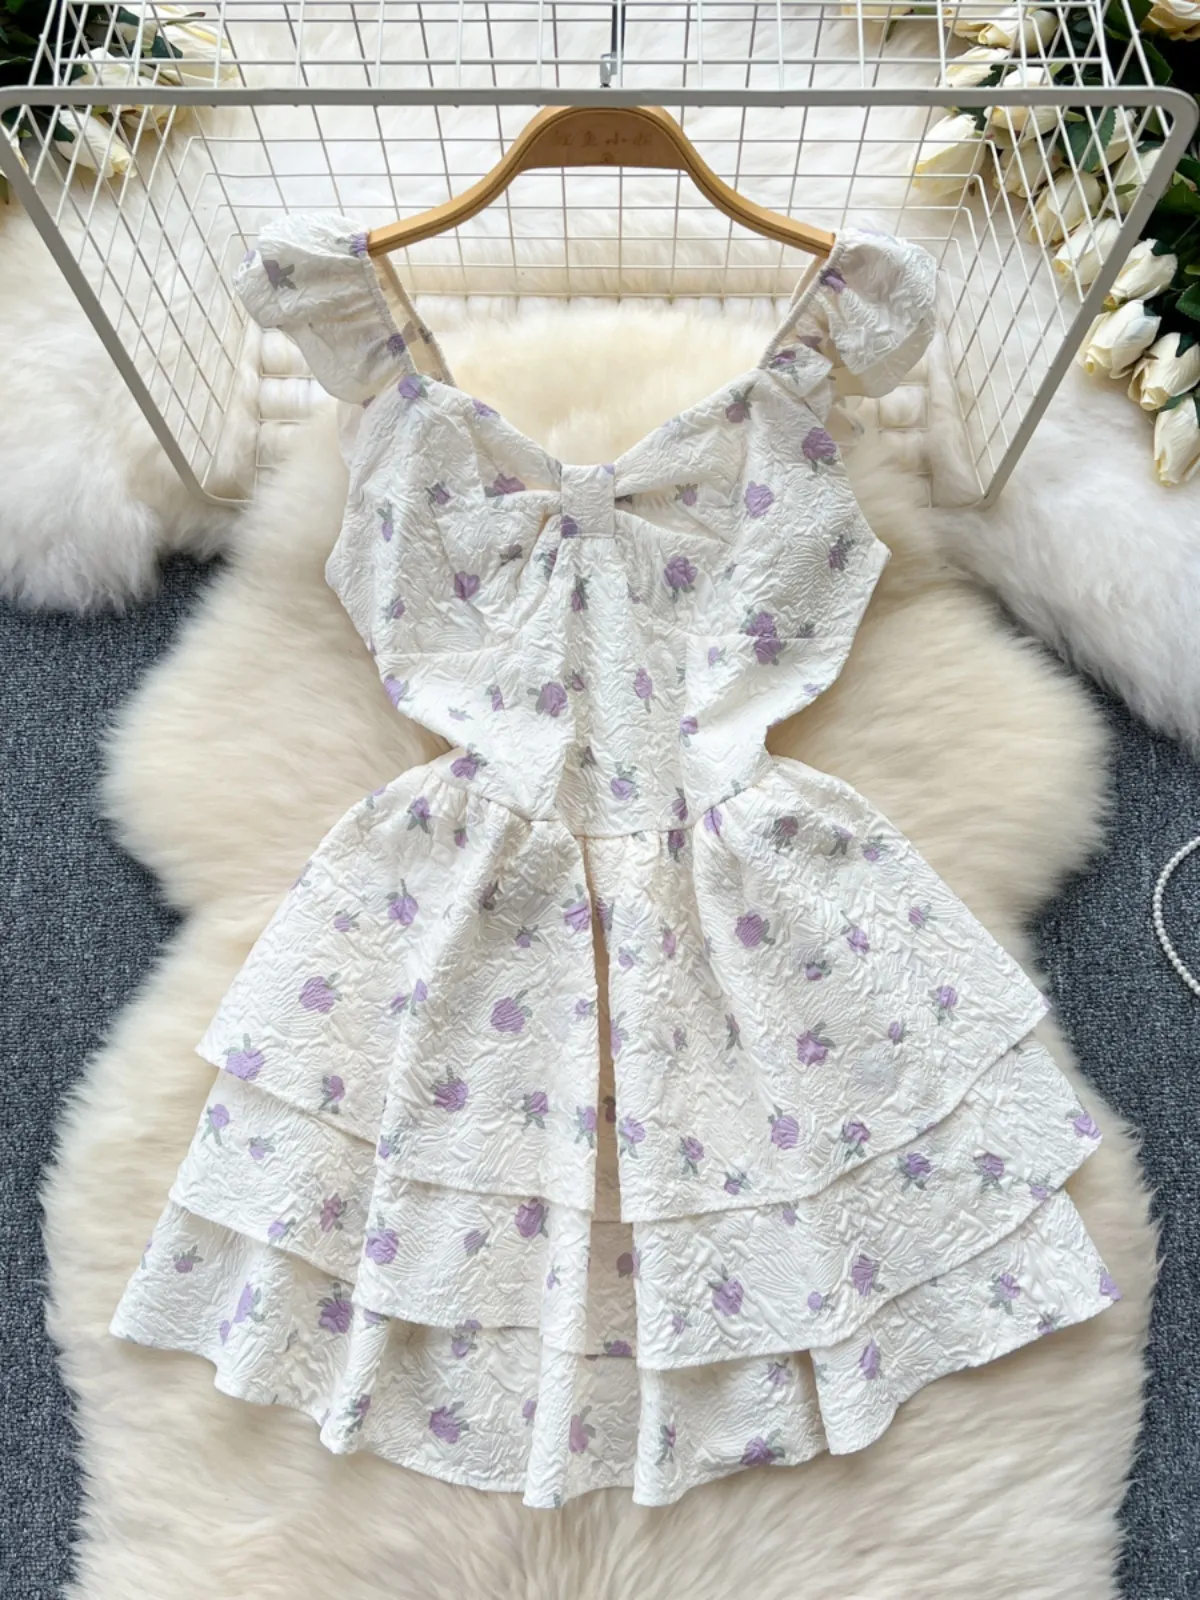 Sweet and fluffy dress for a small summer date wearing French flying sleeves, floral fairy dress, princess dress